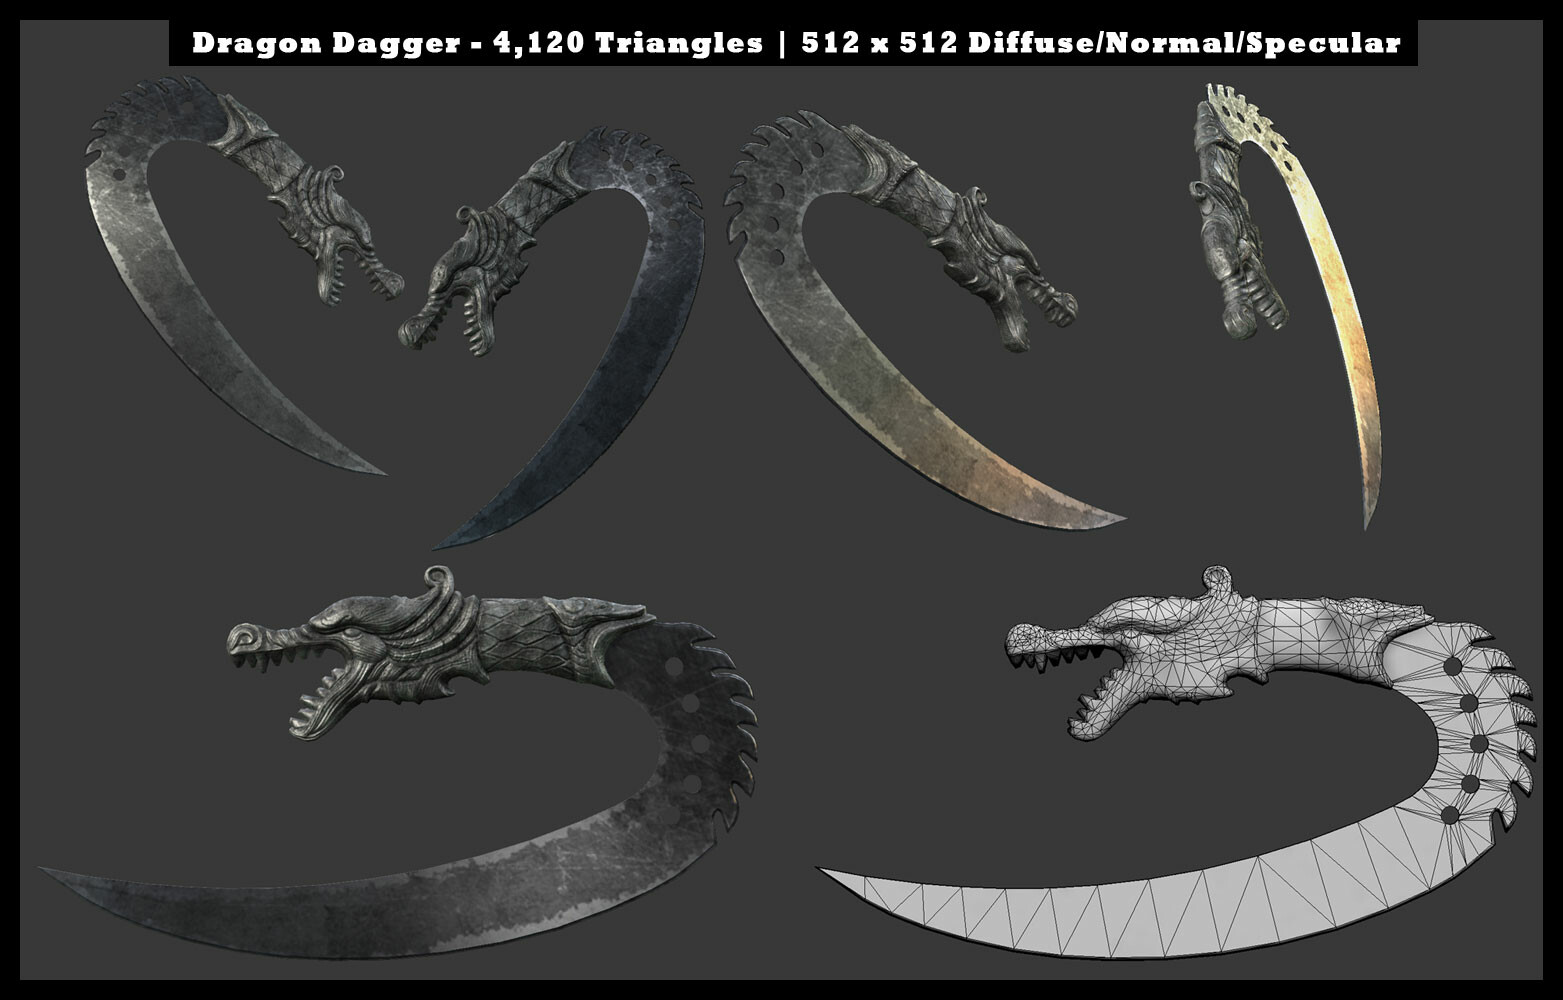 A fantasy blade inspired by Ulaks and the ceremonial knife from Far Cry 3.